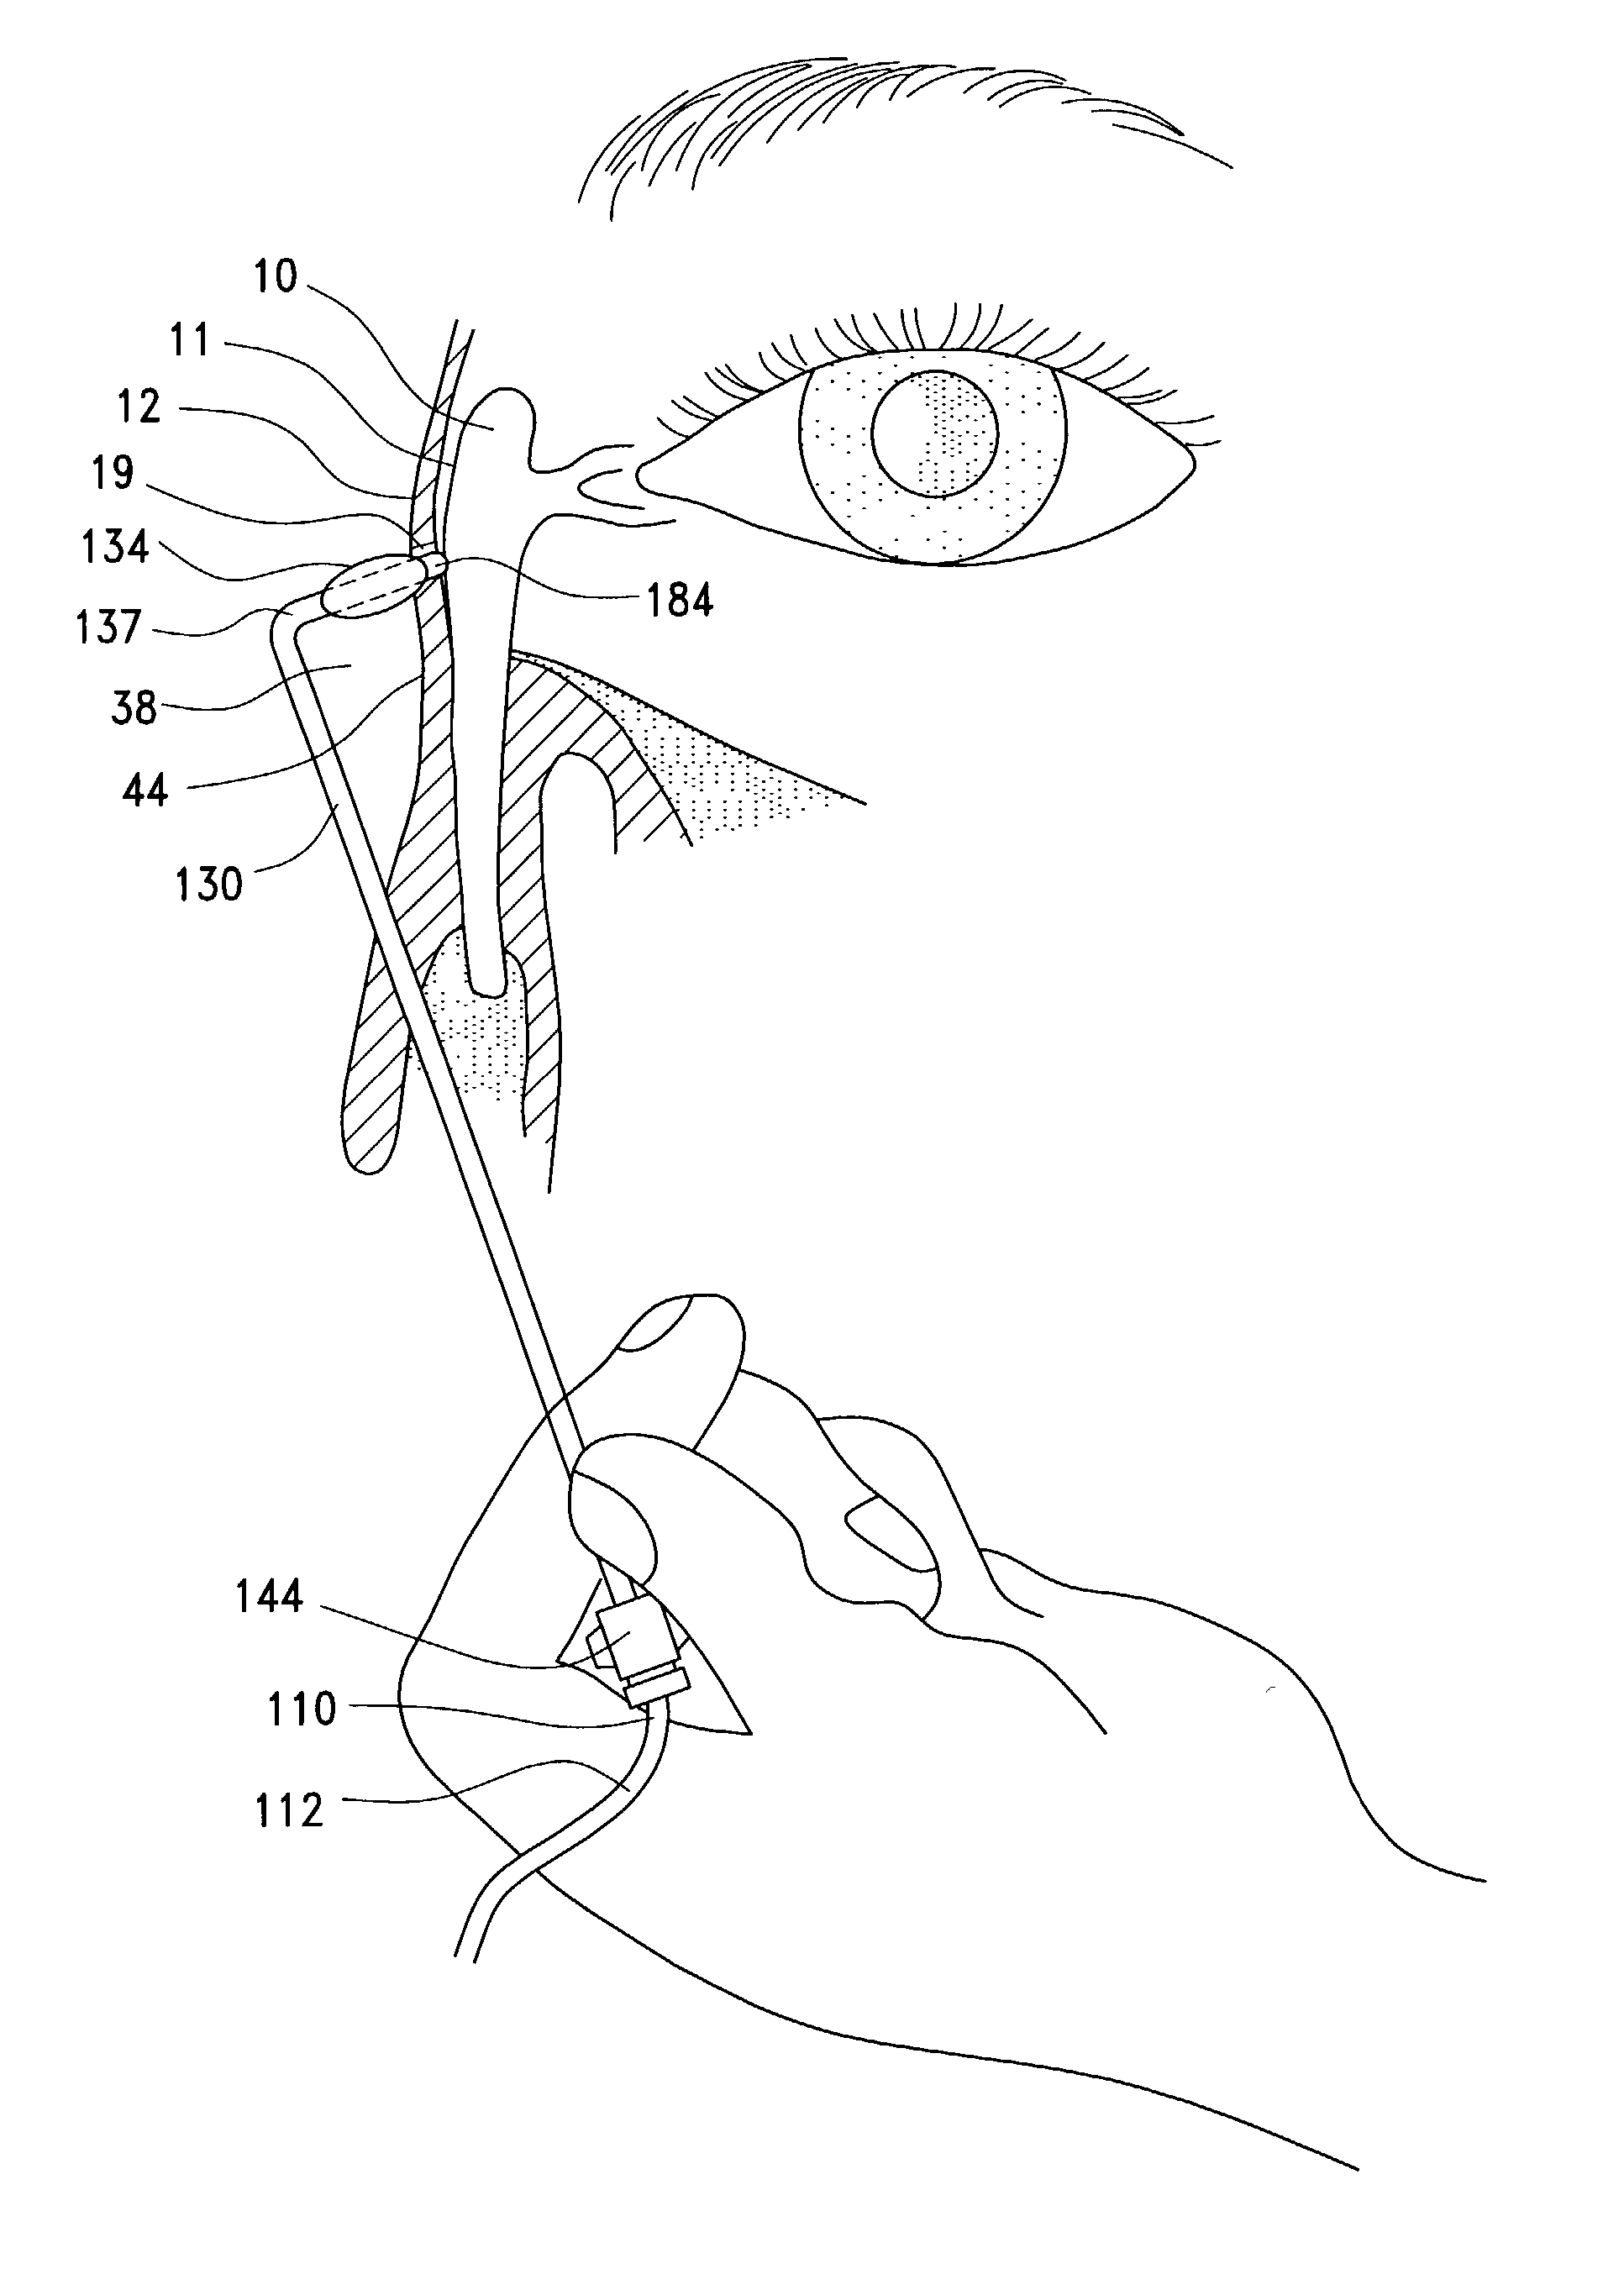 Transnasal method and catheter for lacrimal system